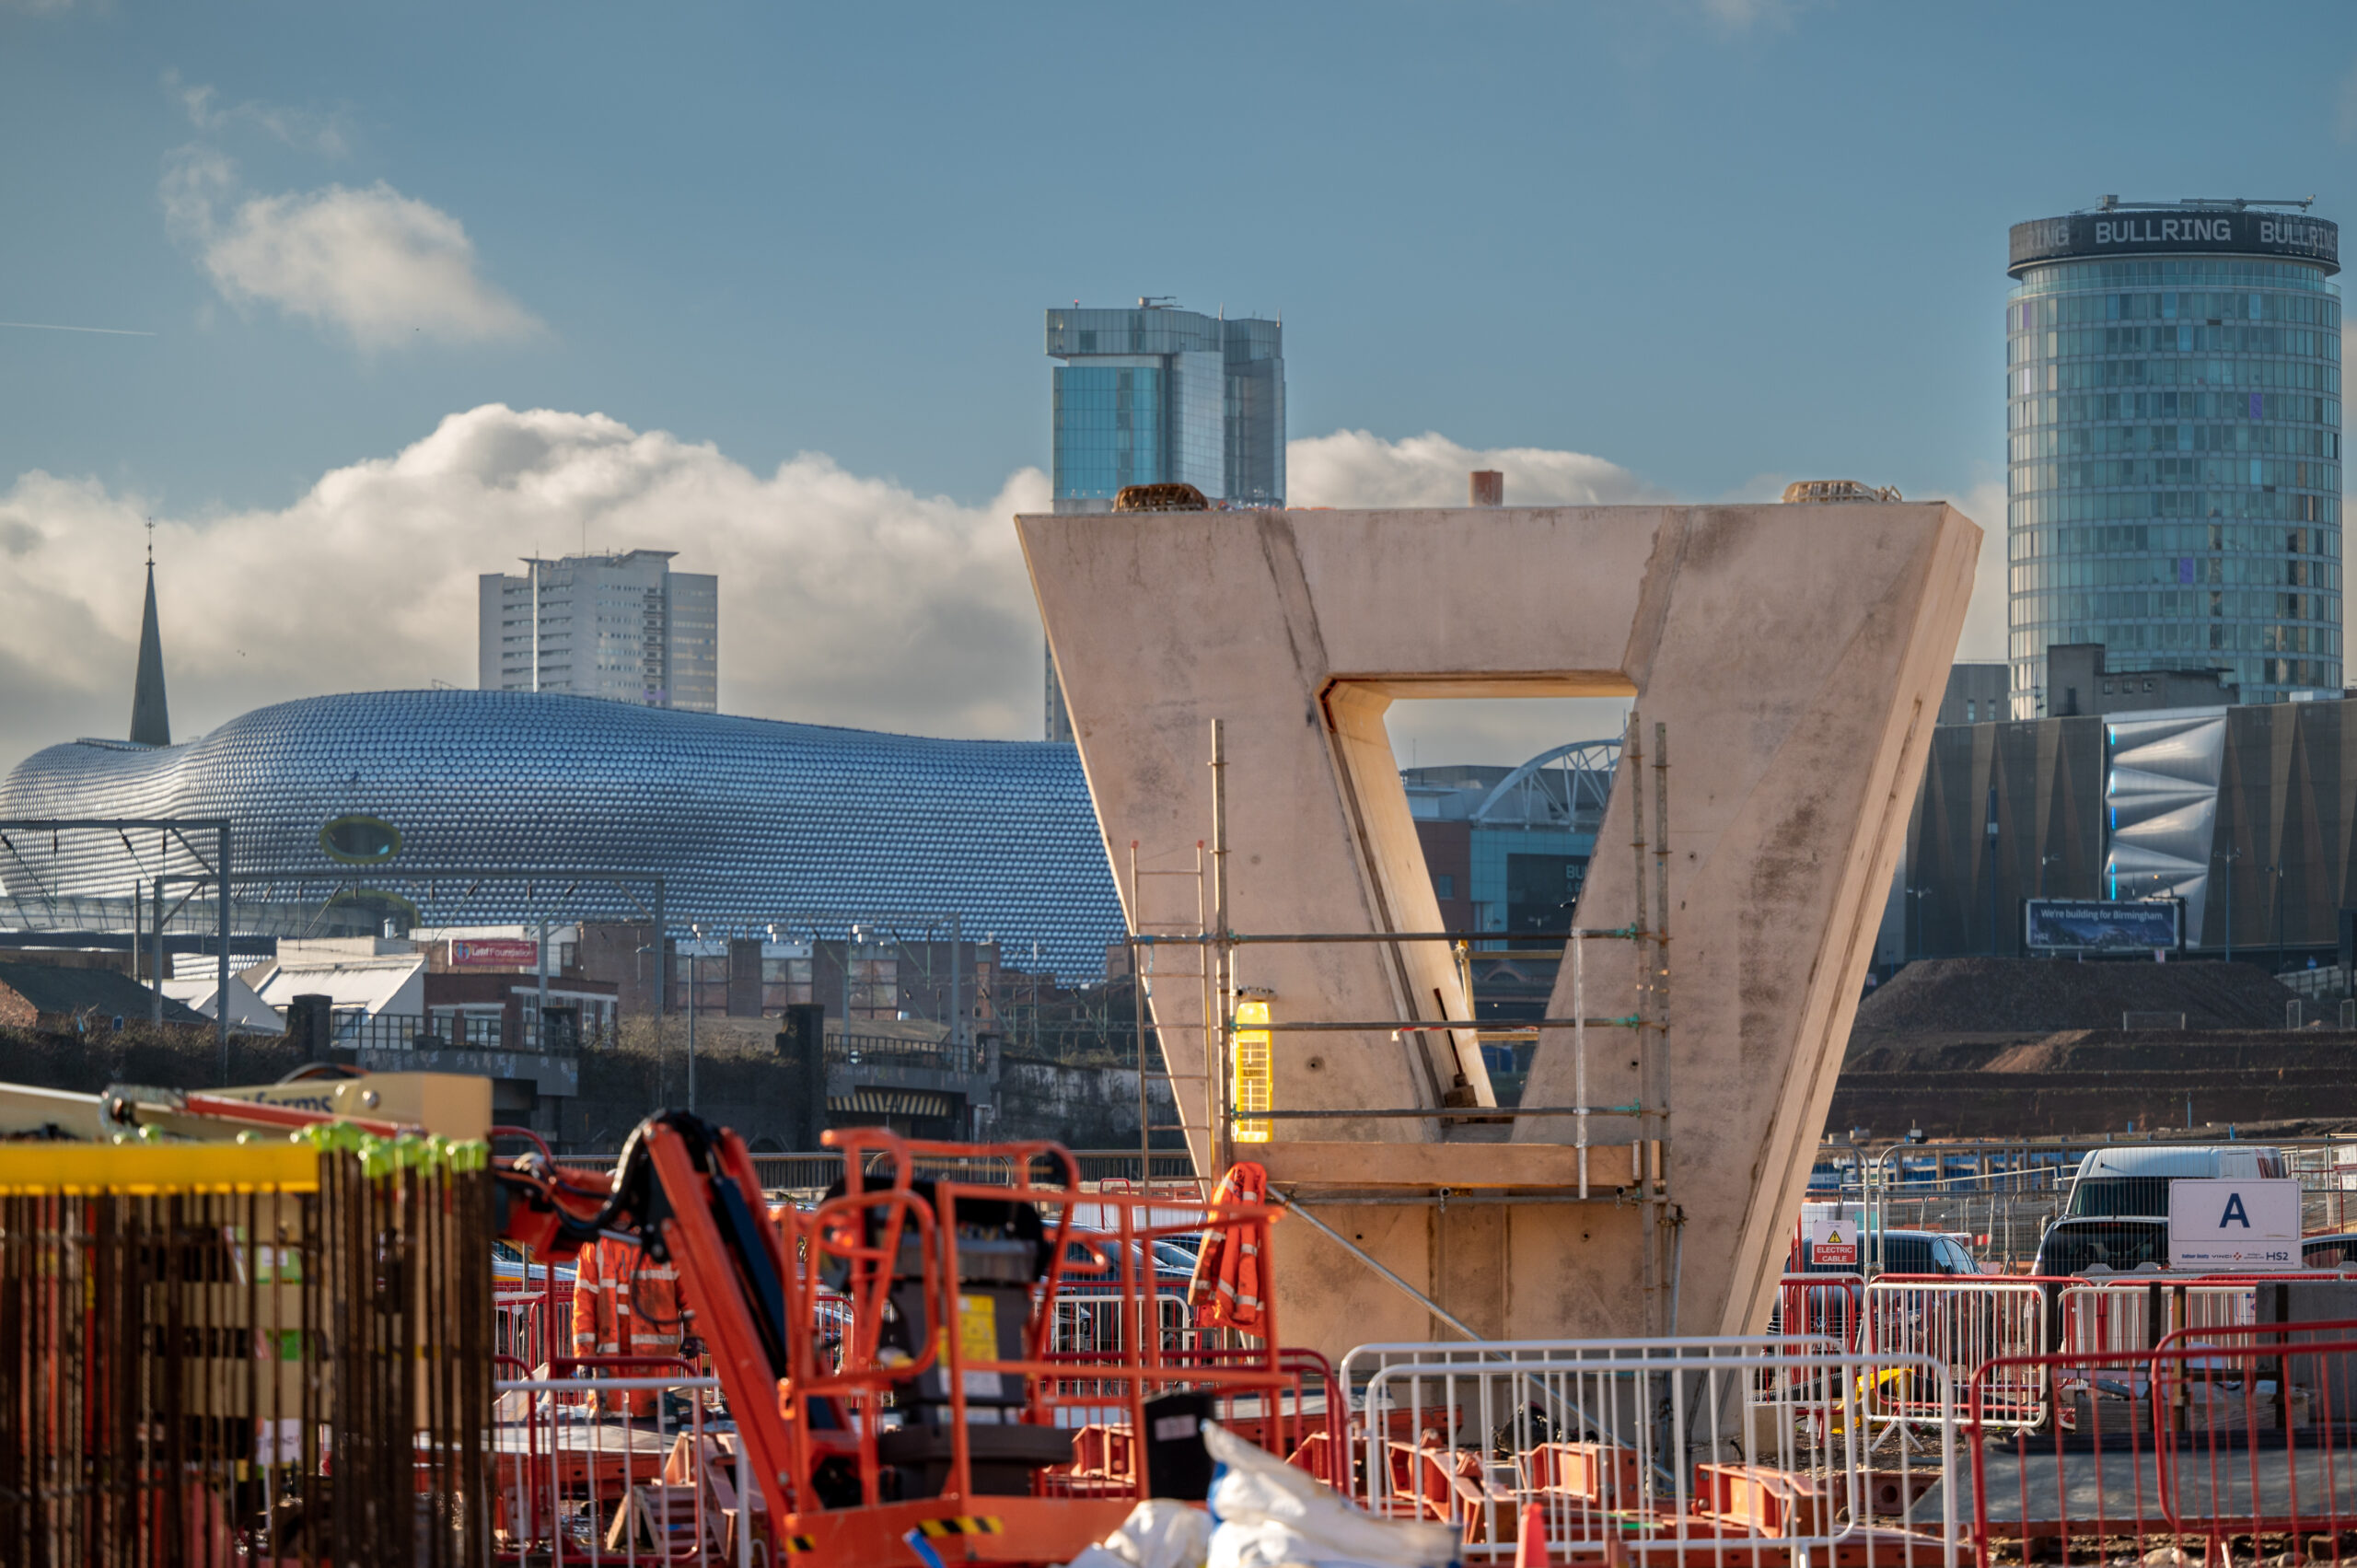 HS2 Ltd has completed the first giant V-shaped pier for the 300m-long viaduct that will bring high speed trains into the new Curzon Street Station in Birmingham